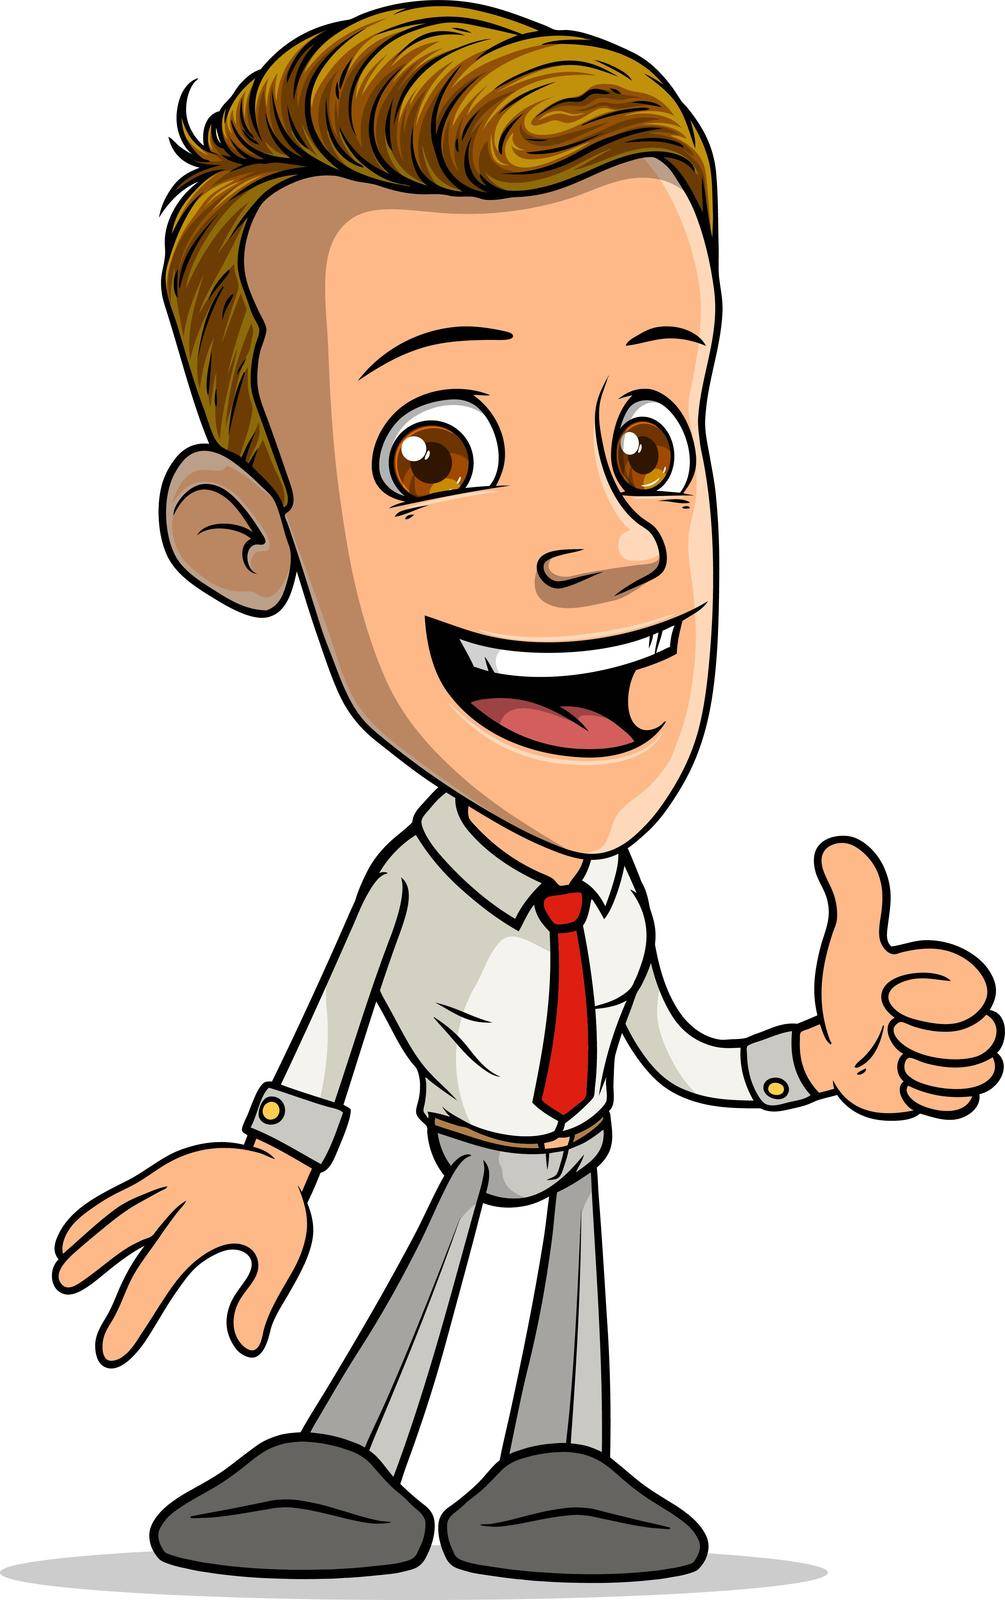 Cartoon brunette standing funny smiling boy character showing thumbs up, like gesture or sign with red tie. Isolated on white background. Vector icon.